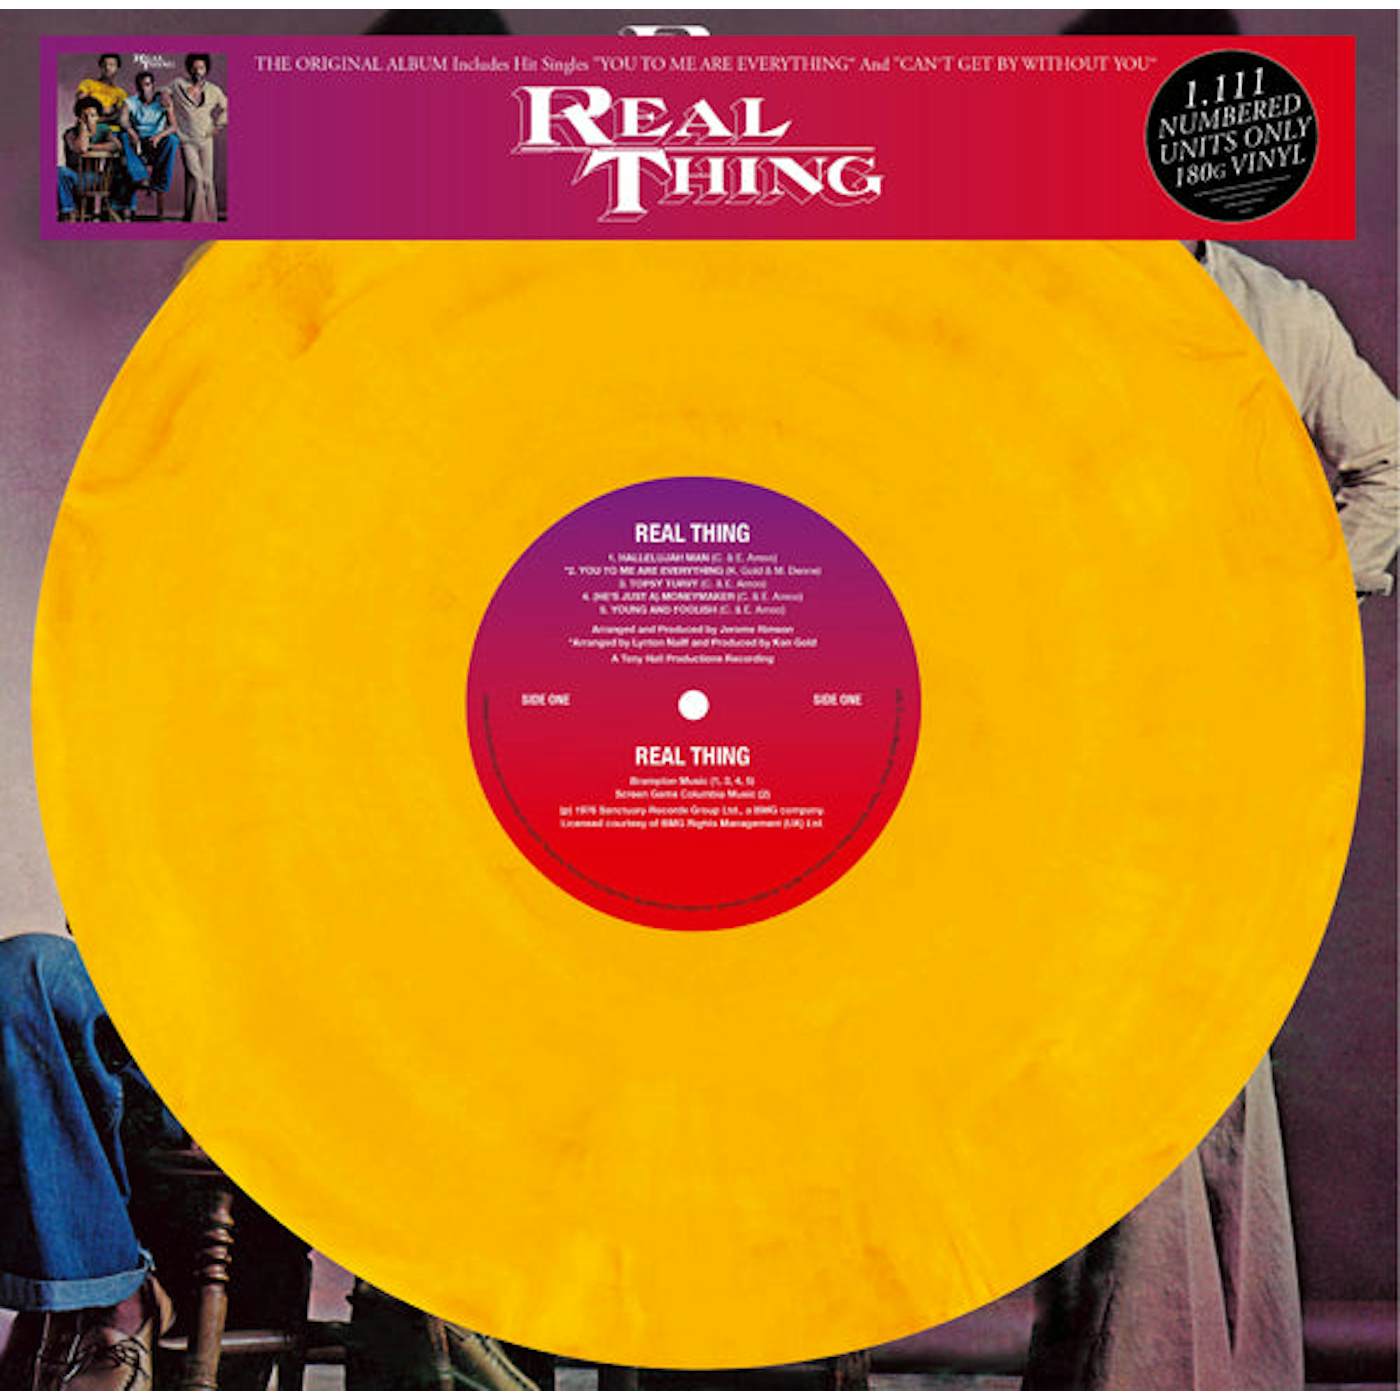 The Real Thing LP - Real Thing [The Original Album] (Vinyl)